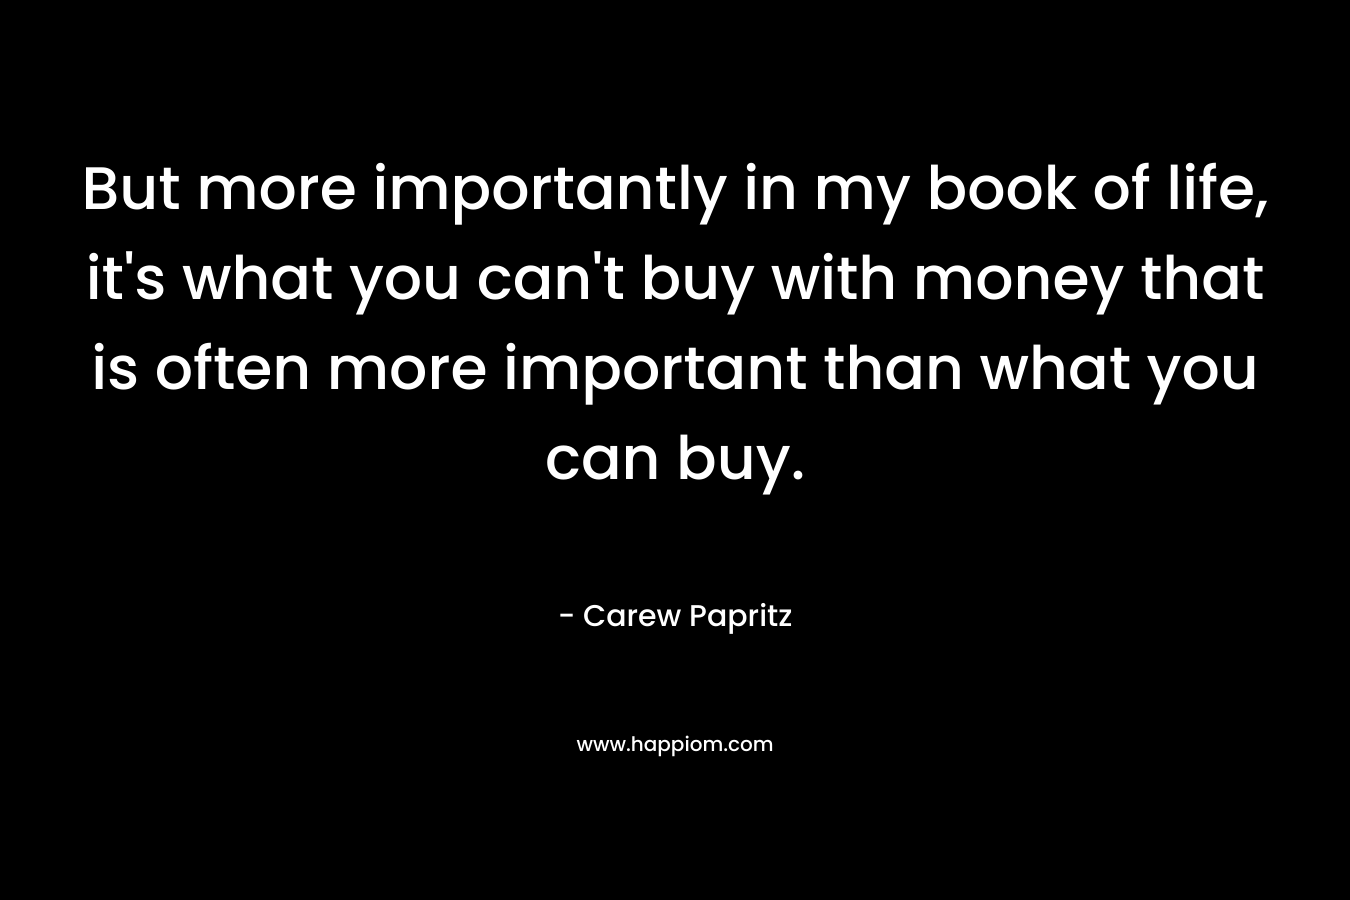 But more importantly in my book of life, it's what you can't buy with money that is often more important than what you can buy.